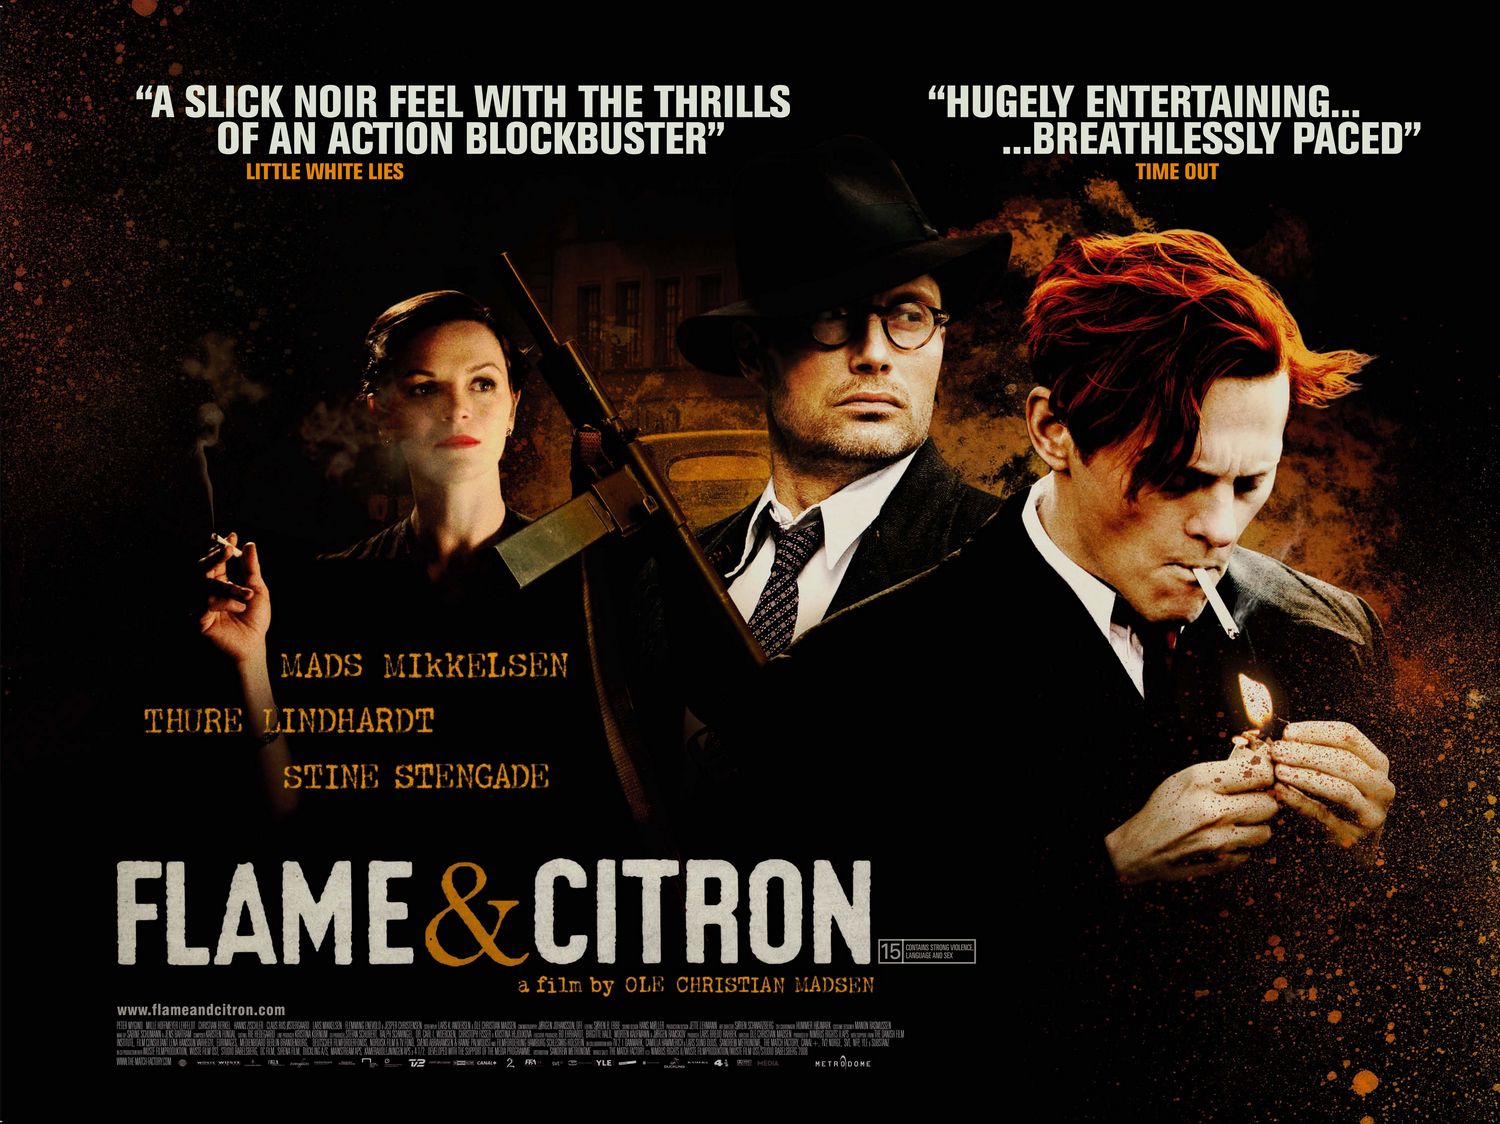 Flame & Citron: Extra Large Movie Poster Image - Internet Movie Poster